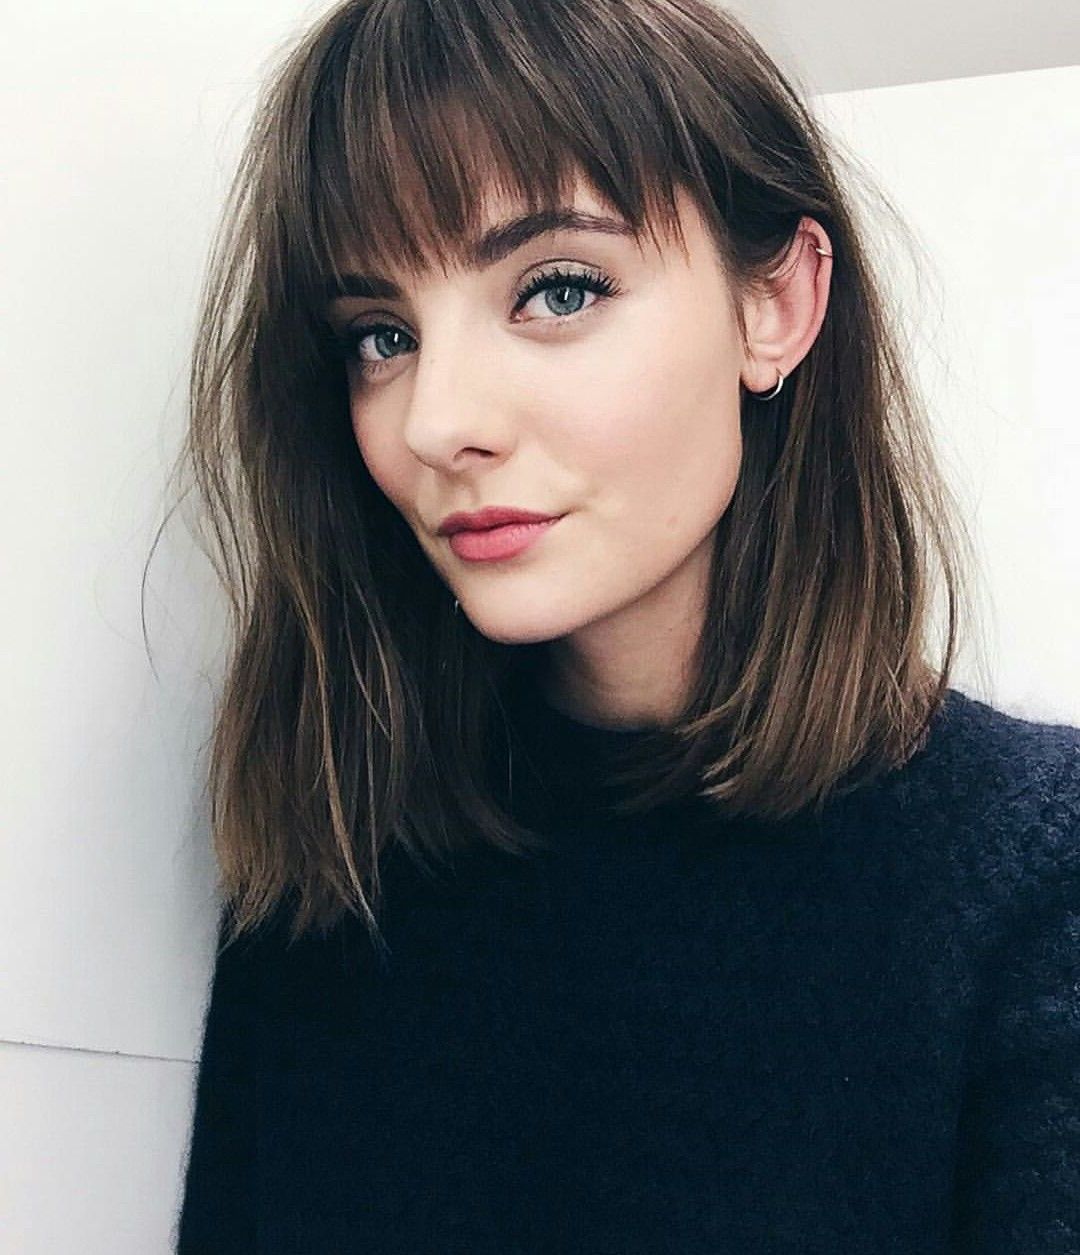 Bob Hairstyles To Inspire Your New Seasonal Look | L O C K S In Straight Bob Hairstyles With Bangs (View 5 of 20)